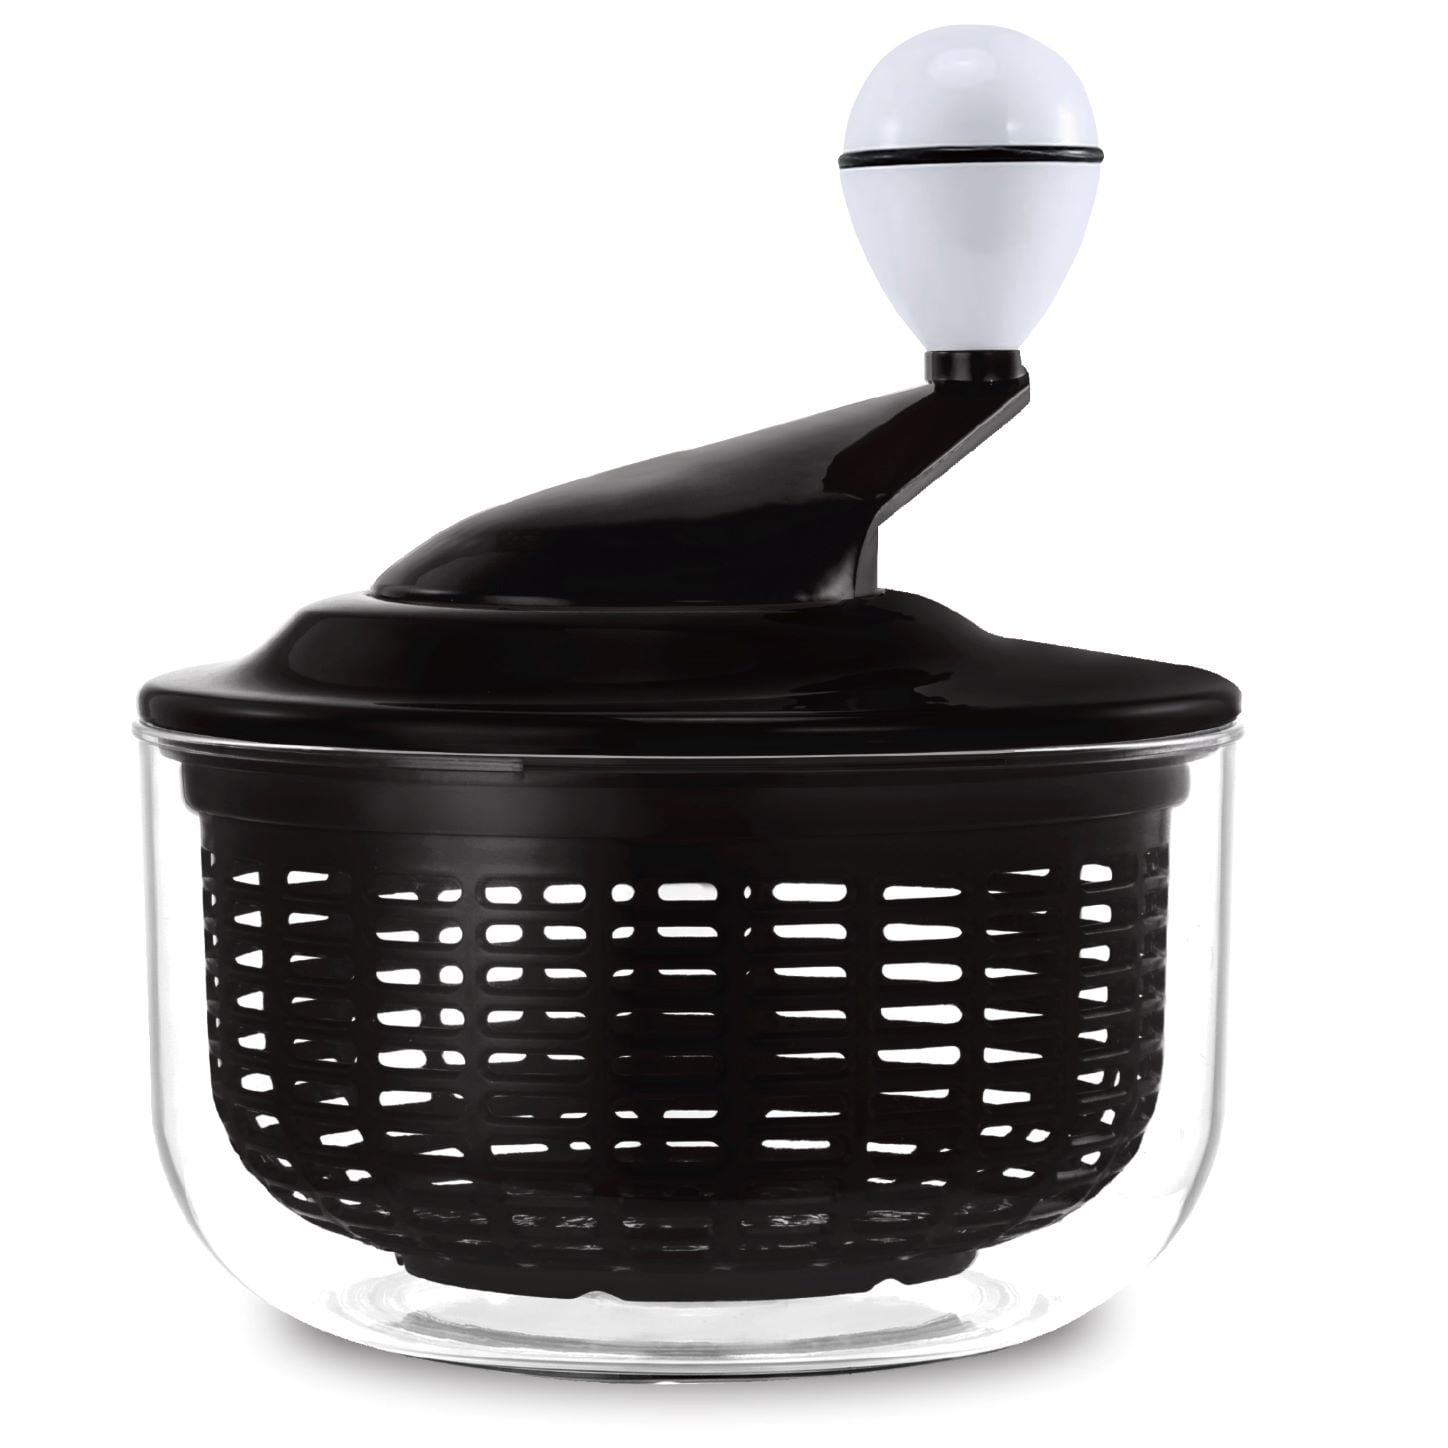 Eat Fresh And Healthy: Reviewing the Best Salad Spinners